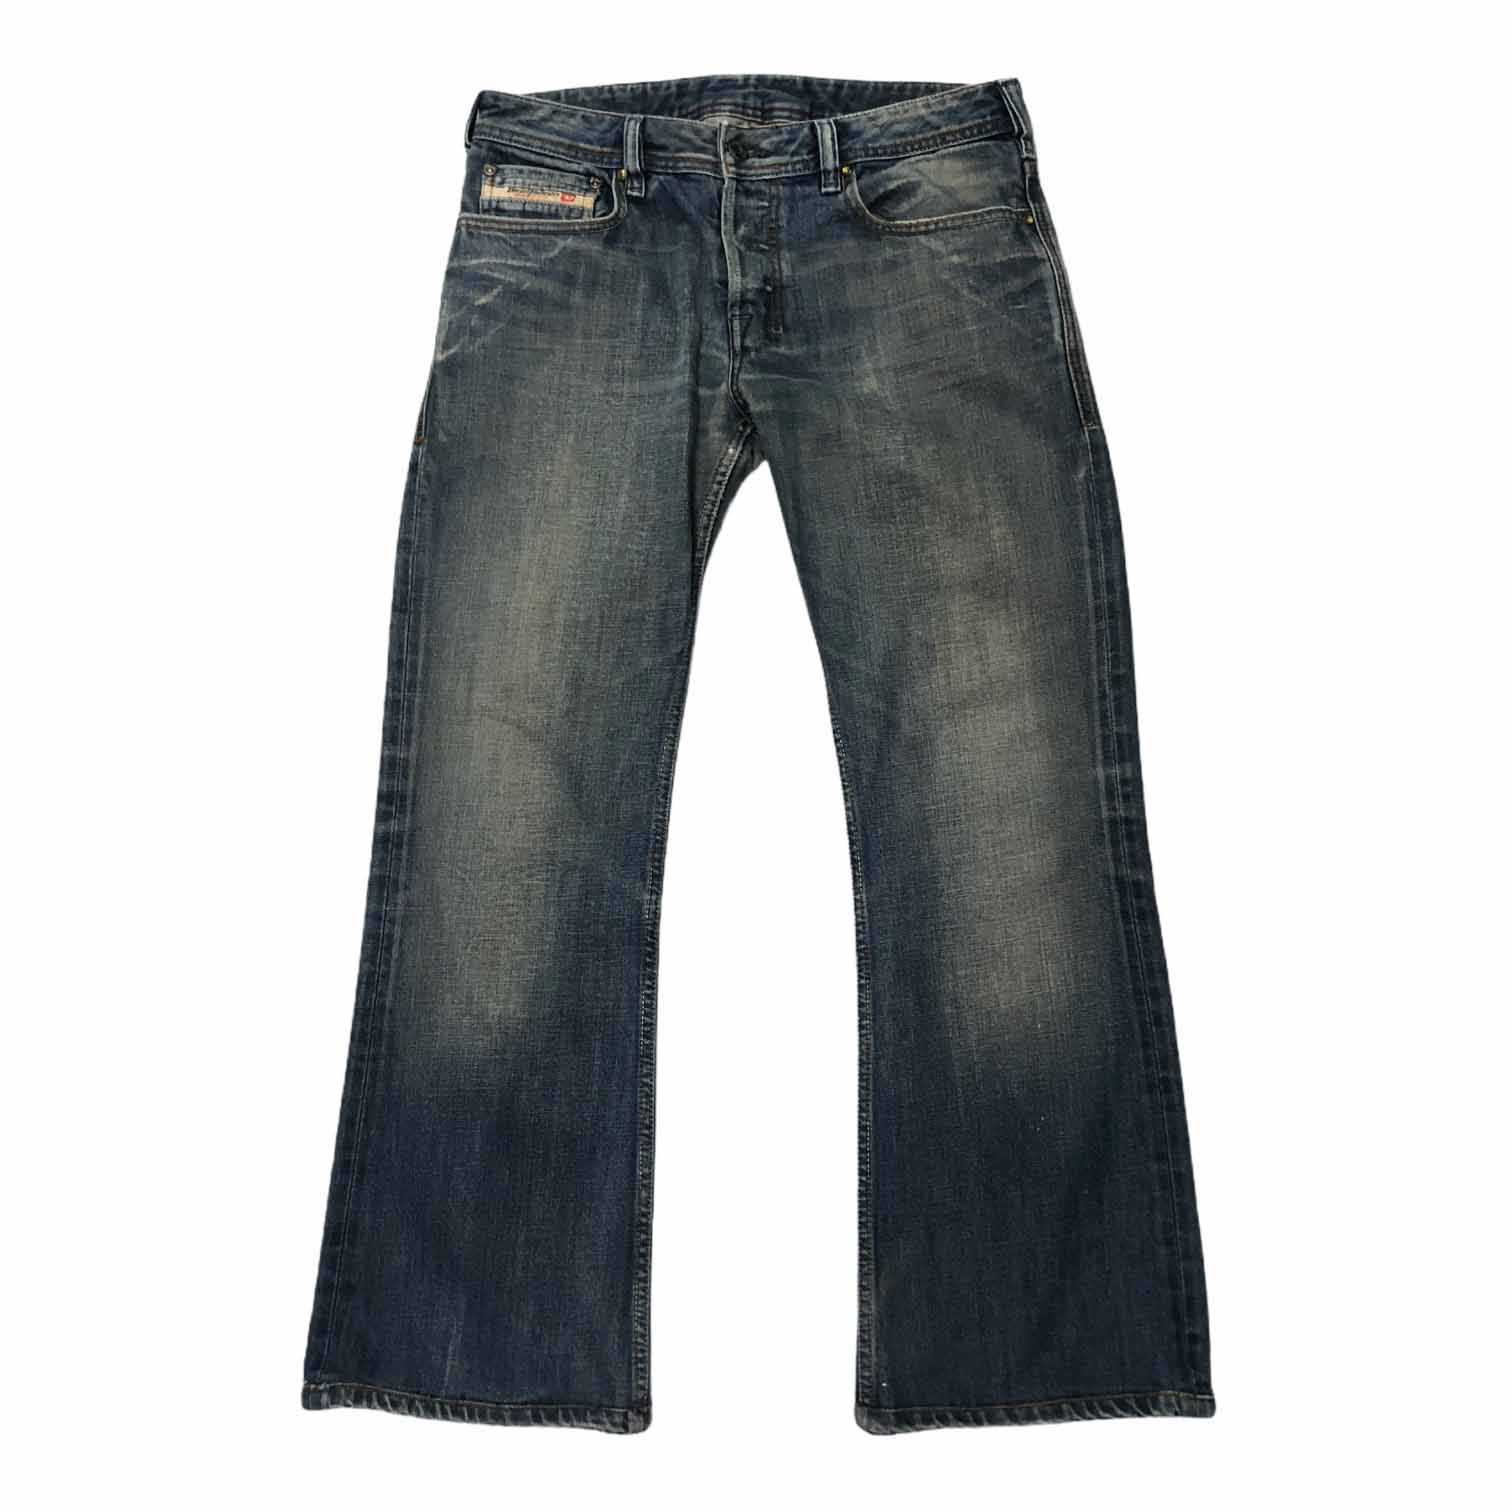 [Diesel] Mid Washed Bootscut Denim Pants - Size 30